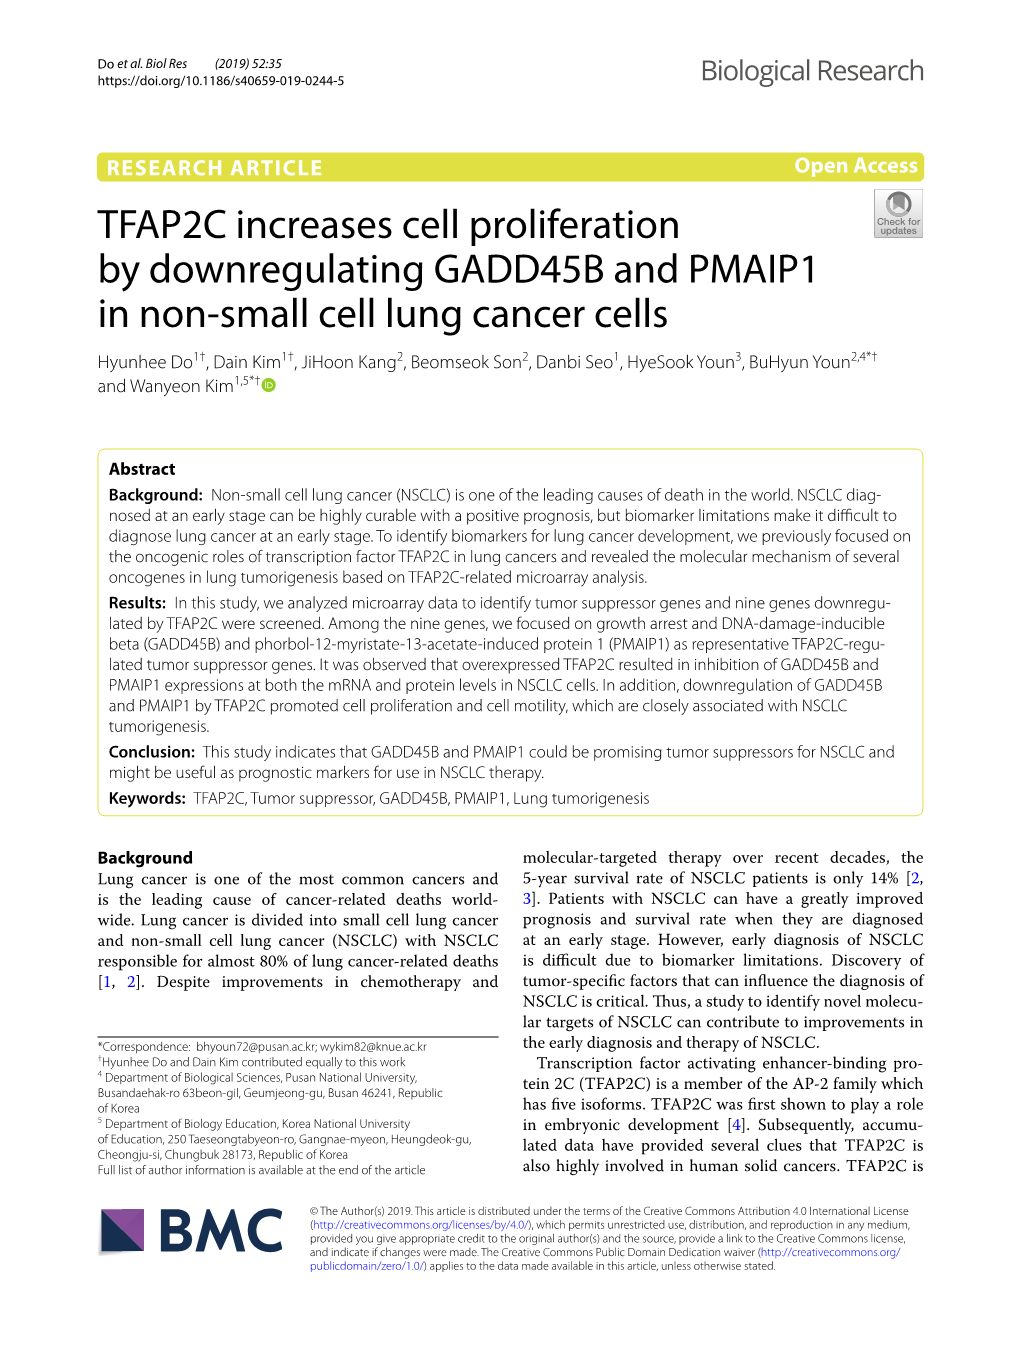 TFAP2C Increases Cell Proliferation by Downregulating GADD45B And